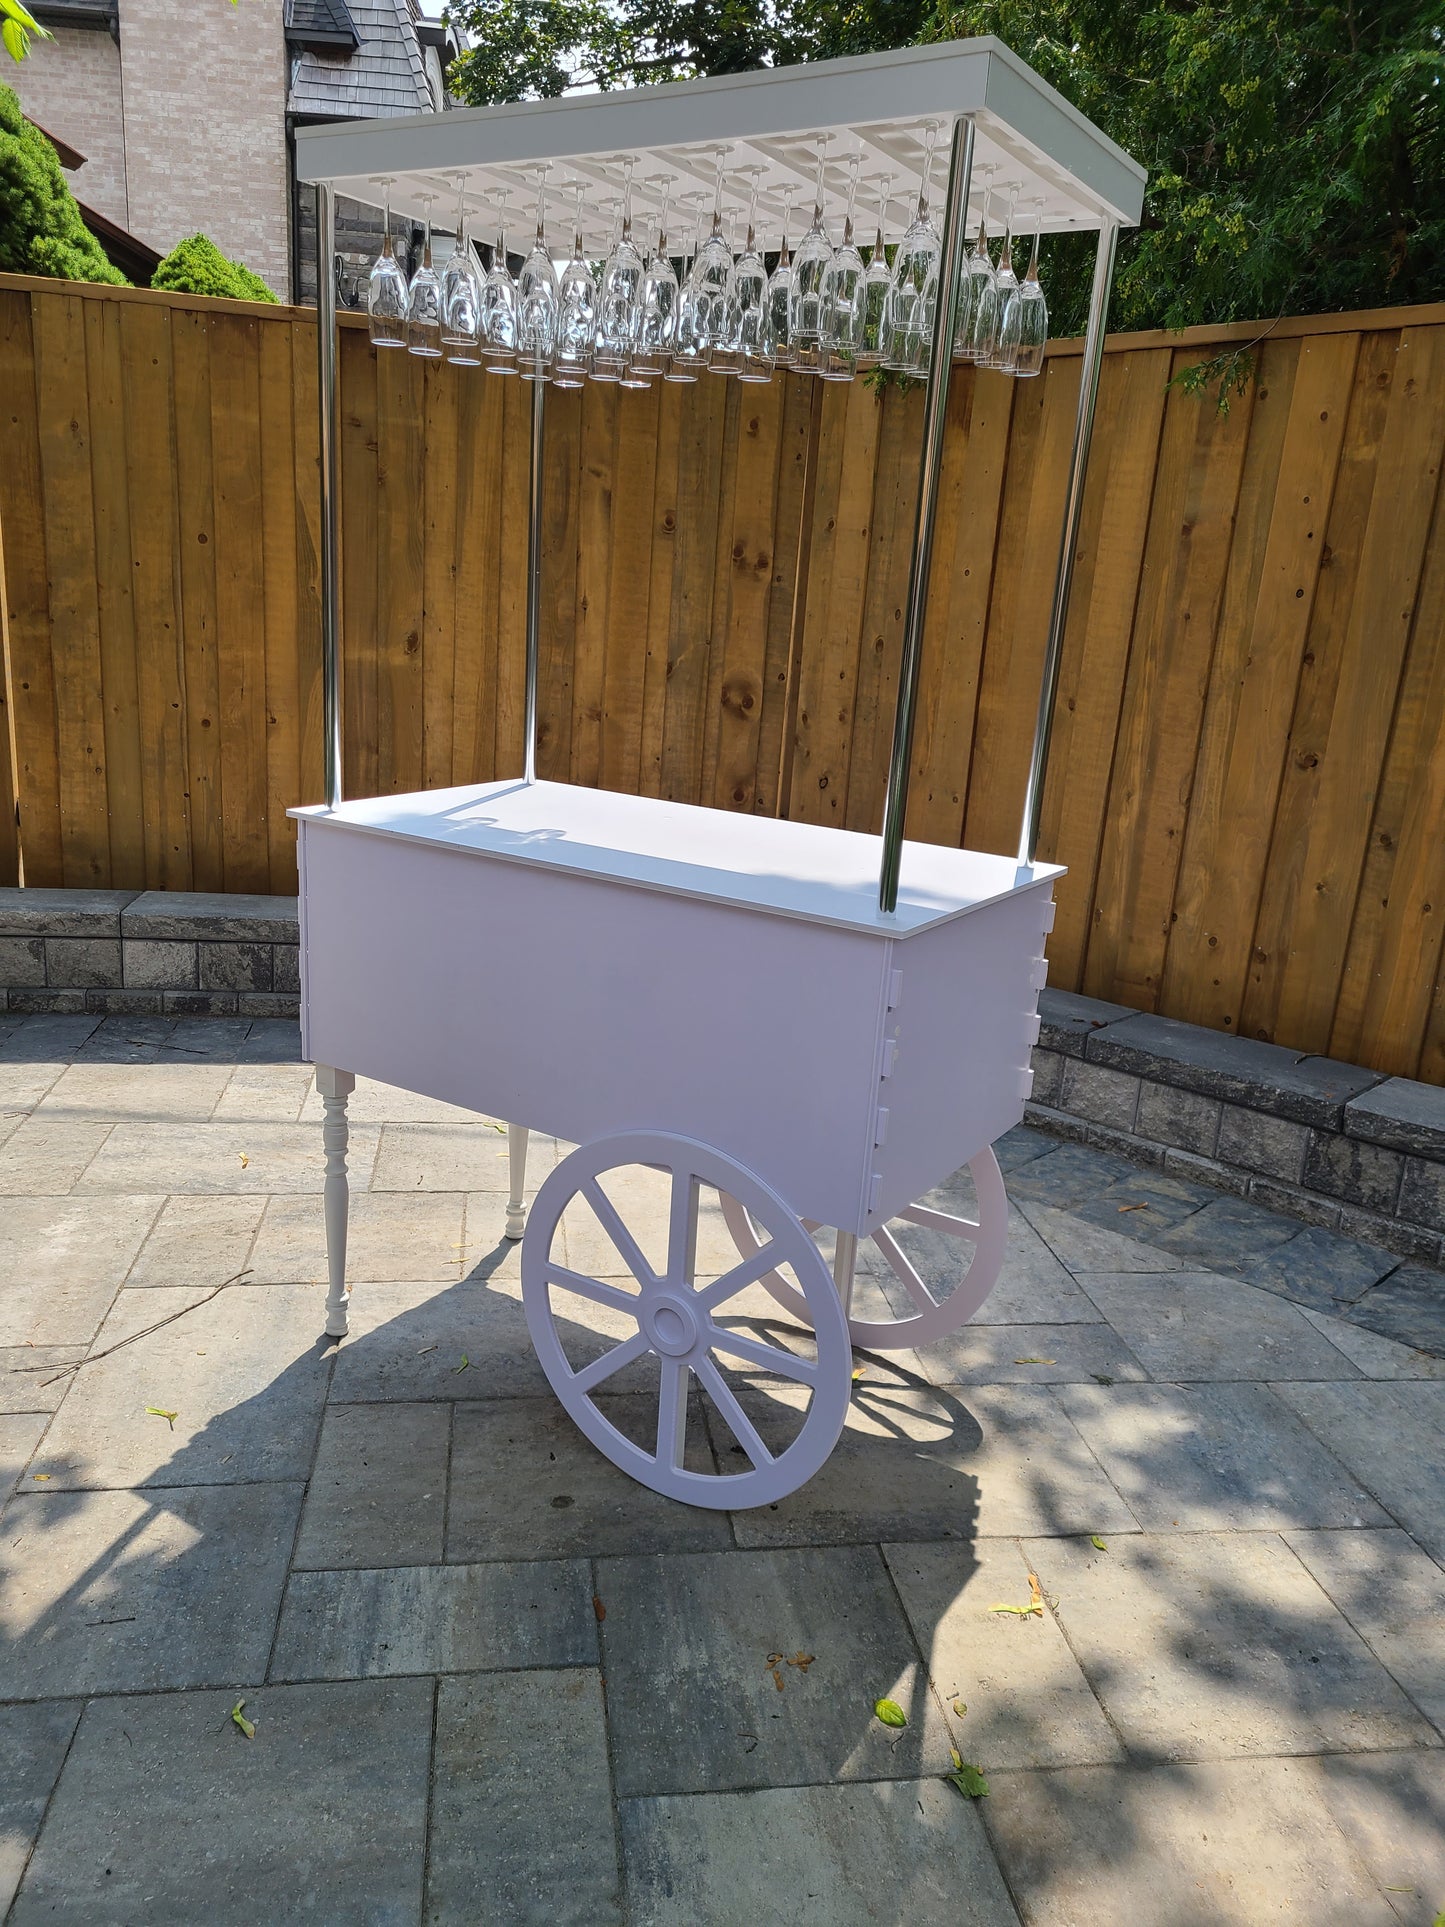 candy carts for sale, Mobile bar cart, drink cart, party decor, wedding decorations, champagne display, event bar, collapsible bar cart, white PVC bar cart, Toronto-made party supplies cart, Toronto-made party supplies